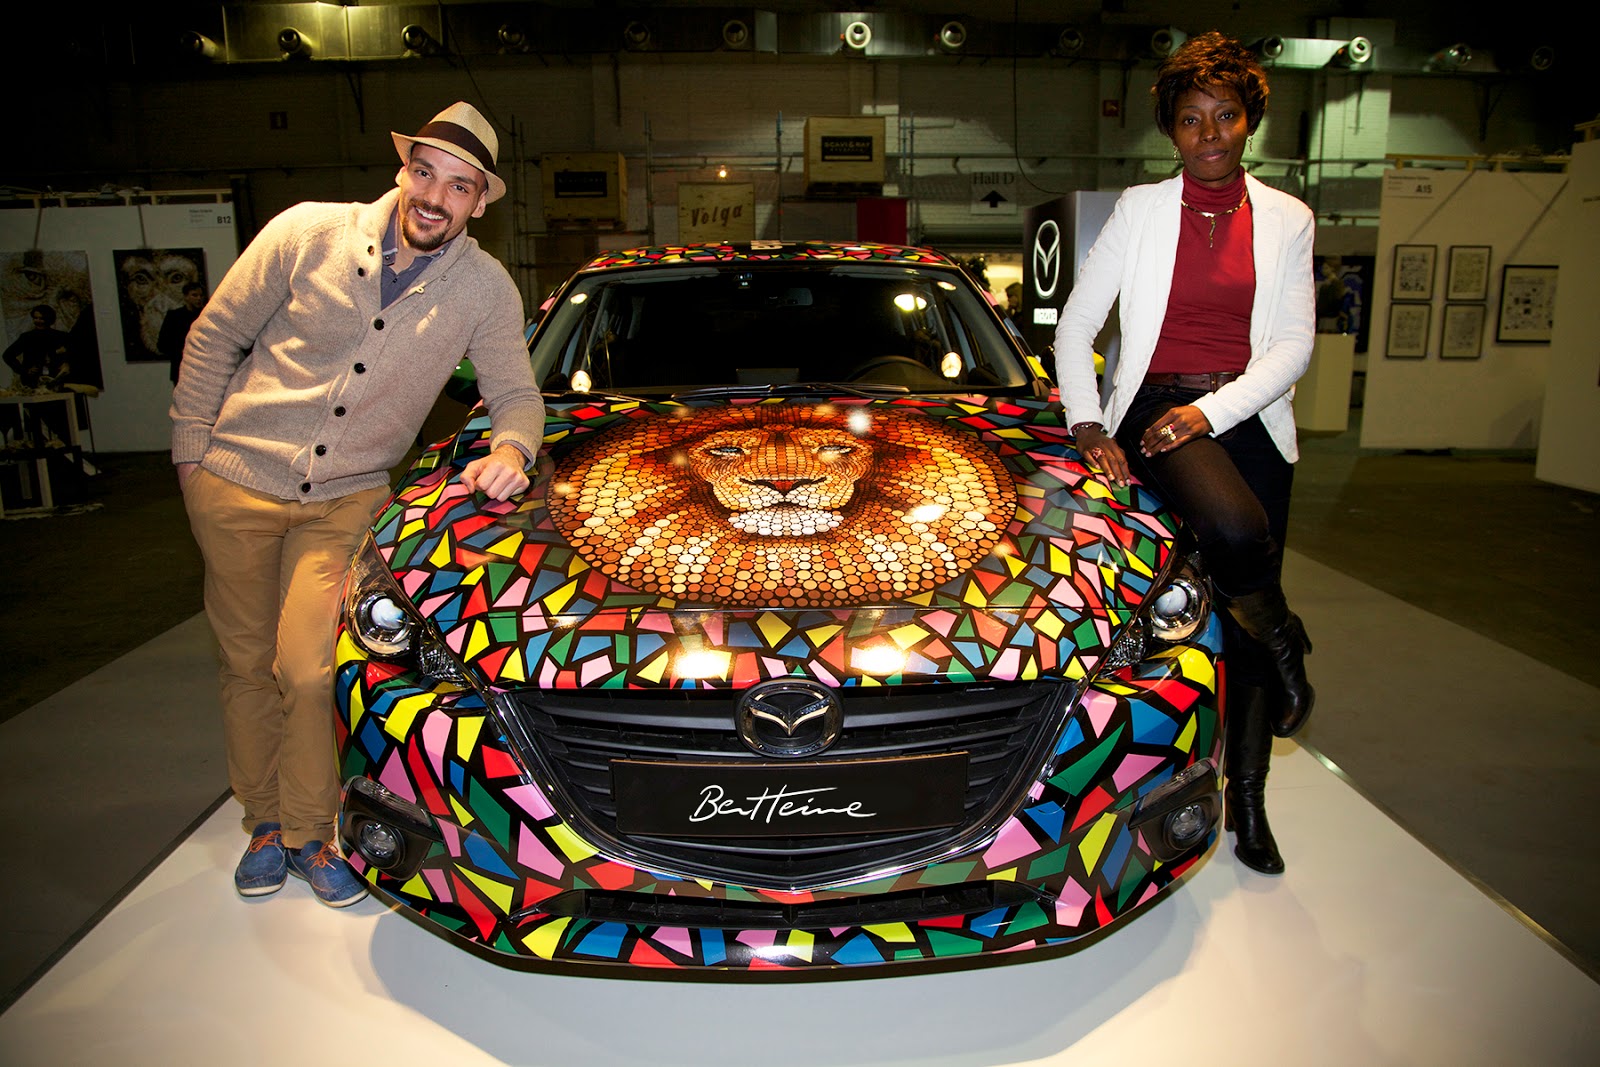 Ben Heine Design on Mazda Car at Brussels Affordable Art Fair (lion made of circles and colorful abstract composition) - 2015